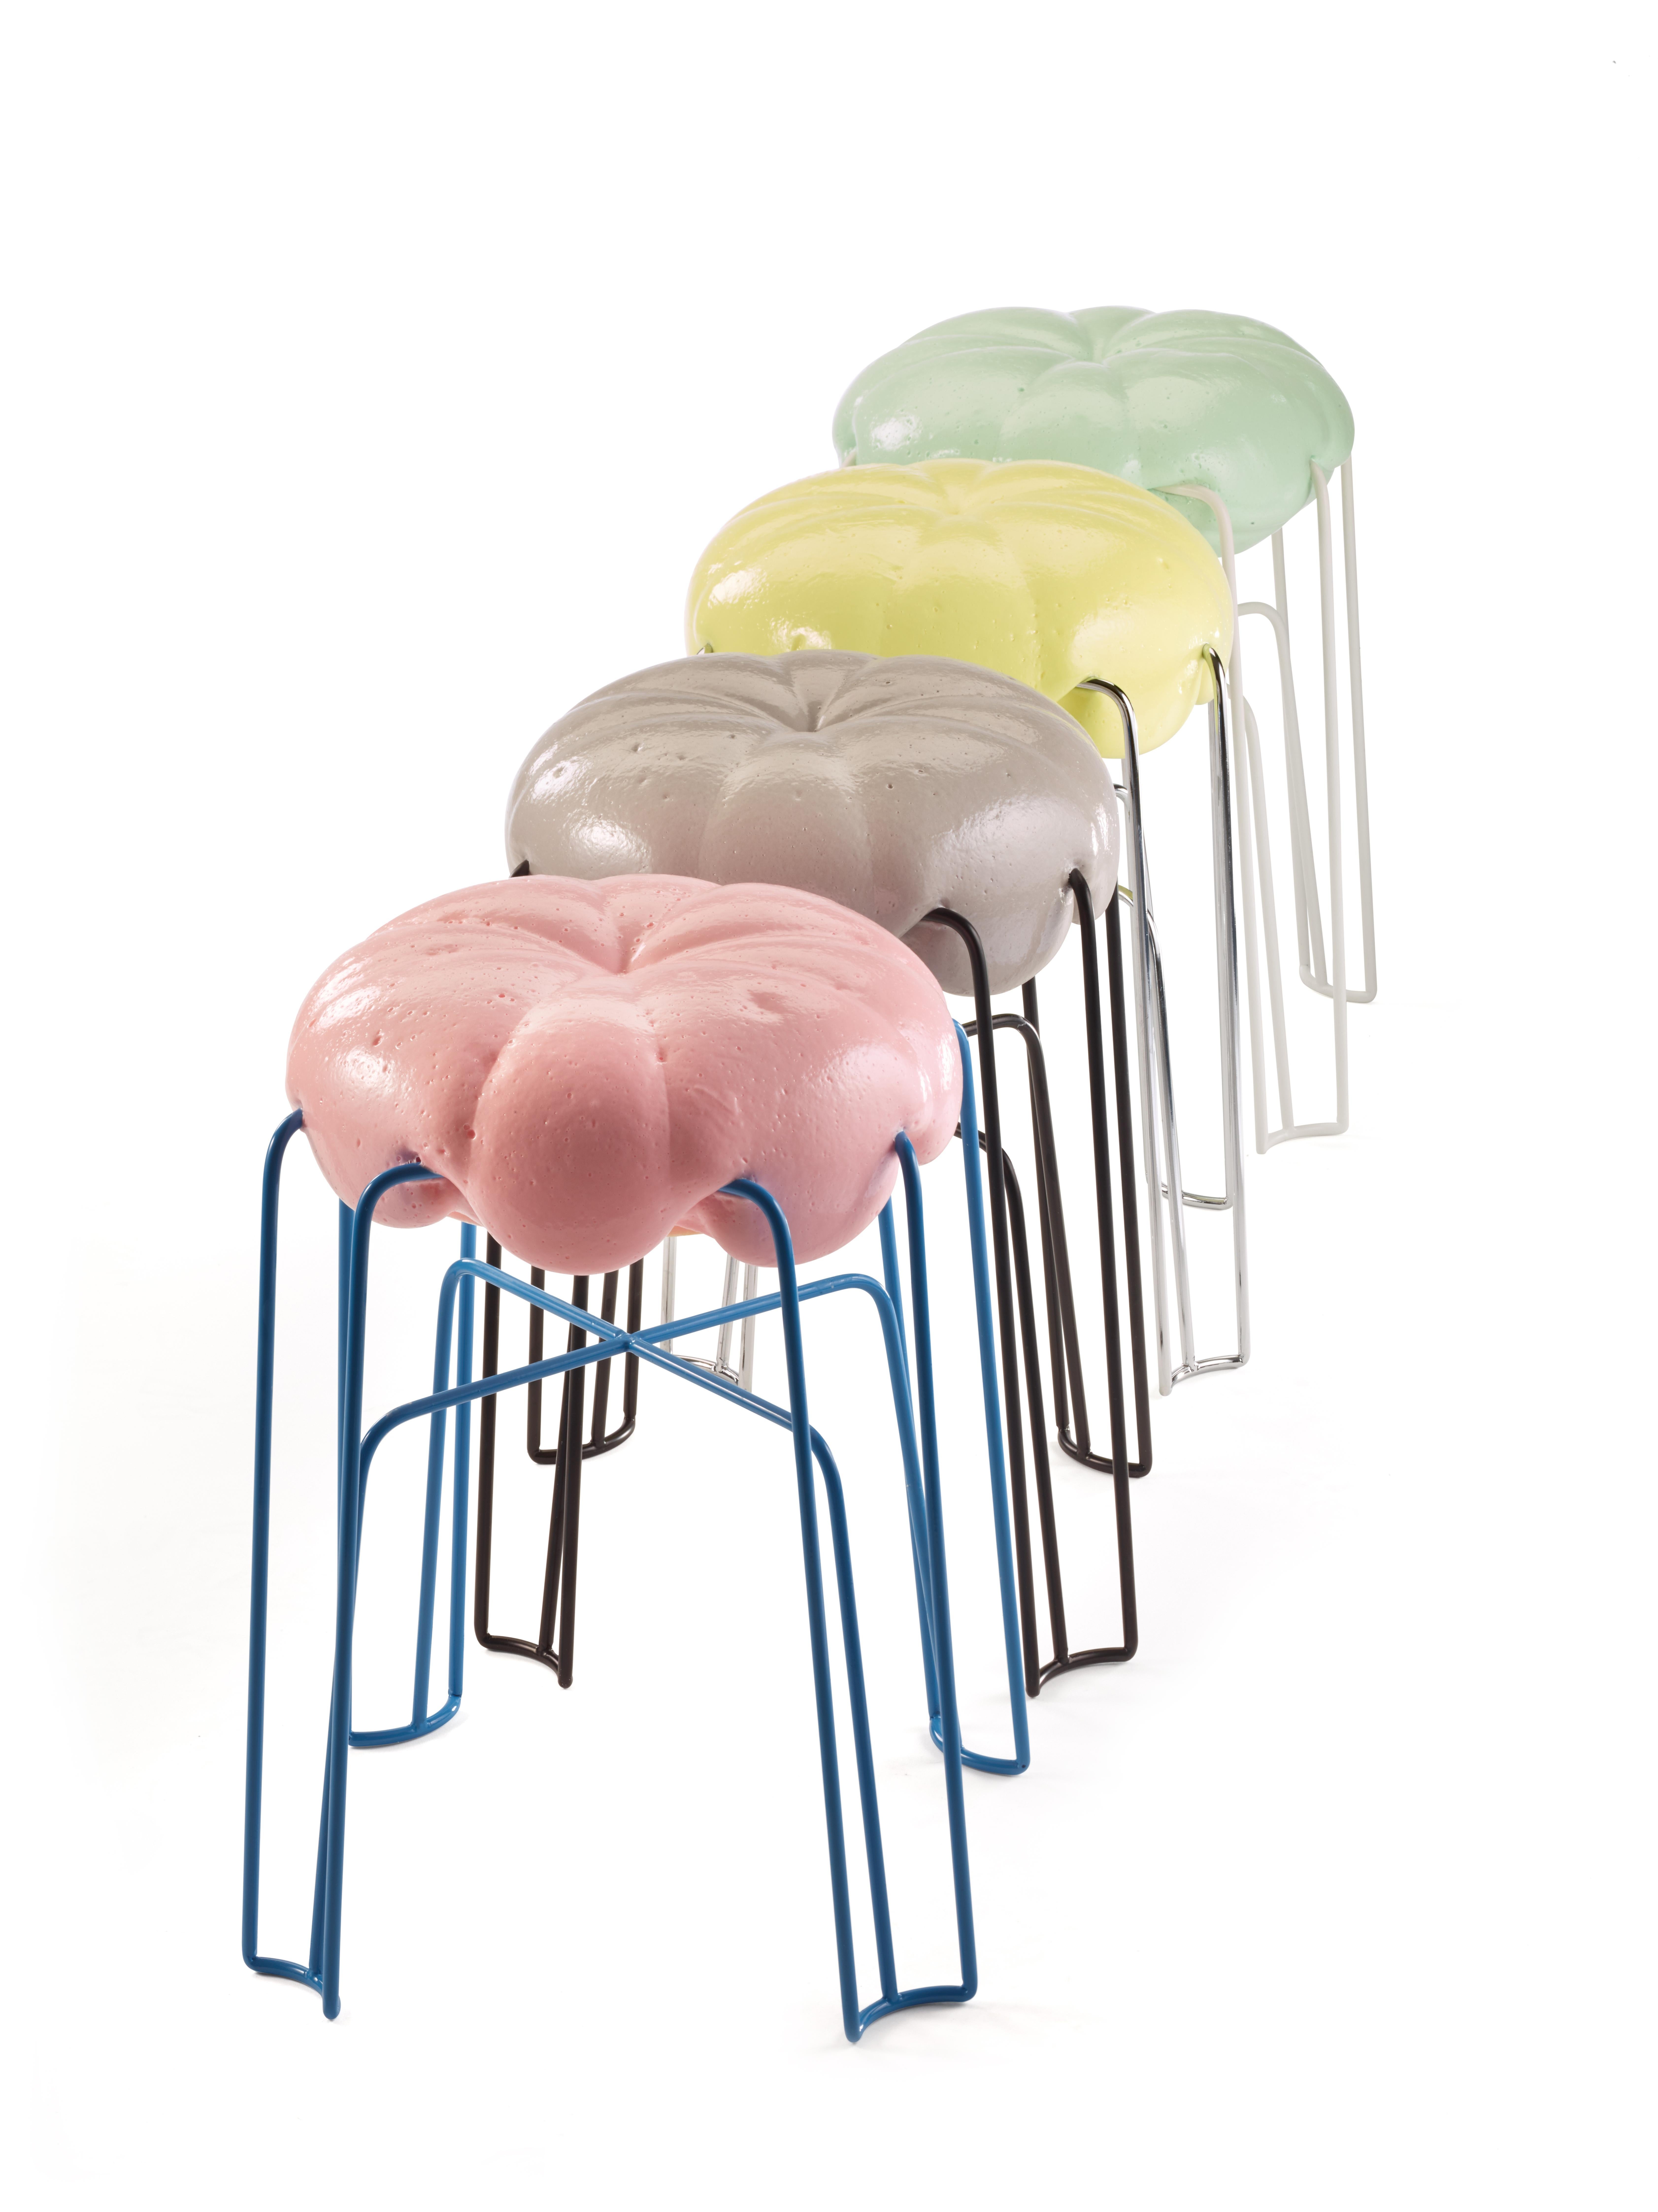 Marshmallow Stool by Paul Ketz in Tennislove Polyurethane Foam and Steel In Excellent Condition For Sale In New York, NY